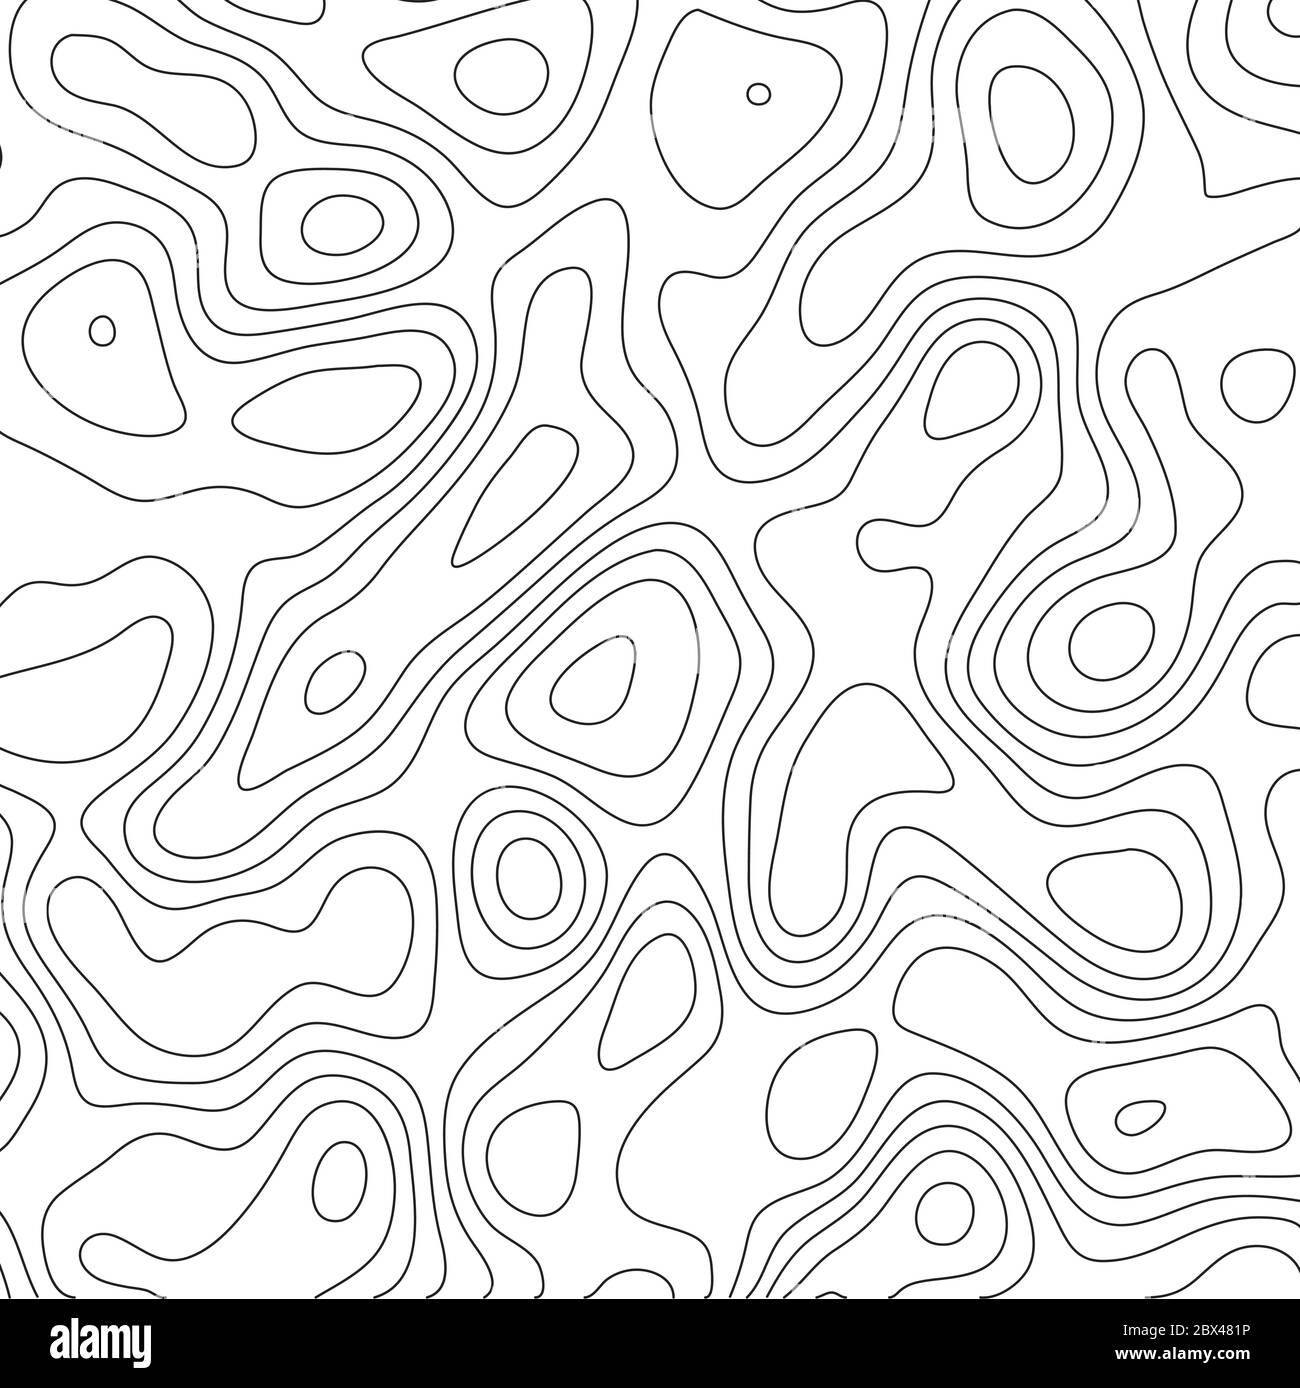 25,200+ Contour Lines Seamless Stock Photos, Pictures & Royalty